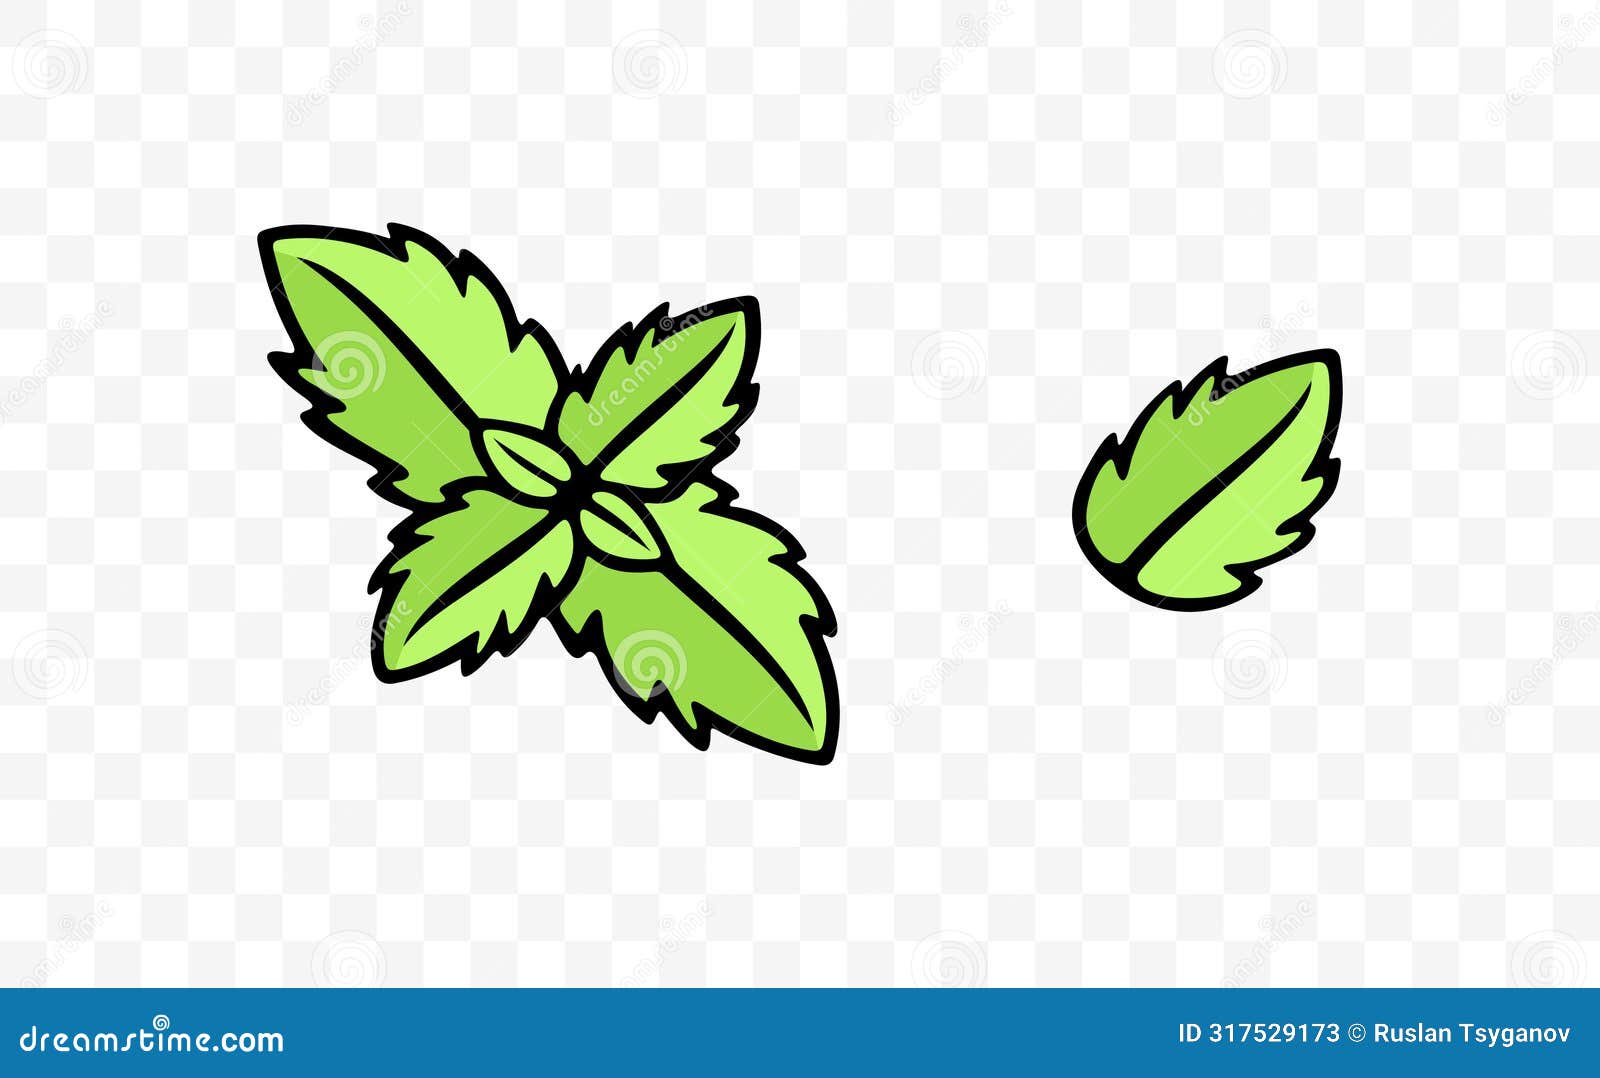 mint and spearmint, herb, mint leaves, graphic 